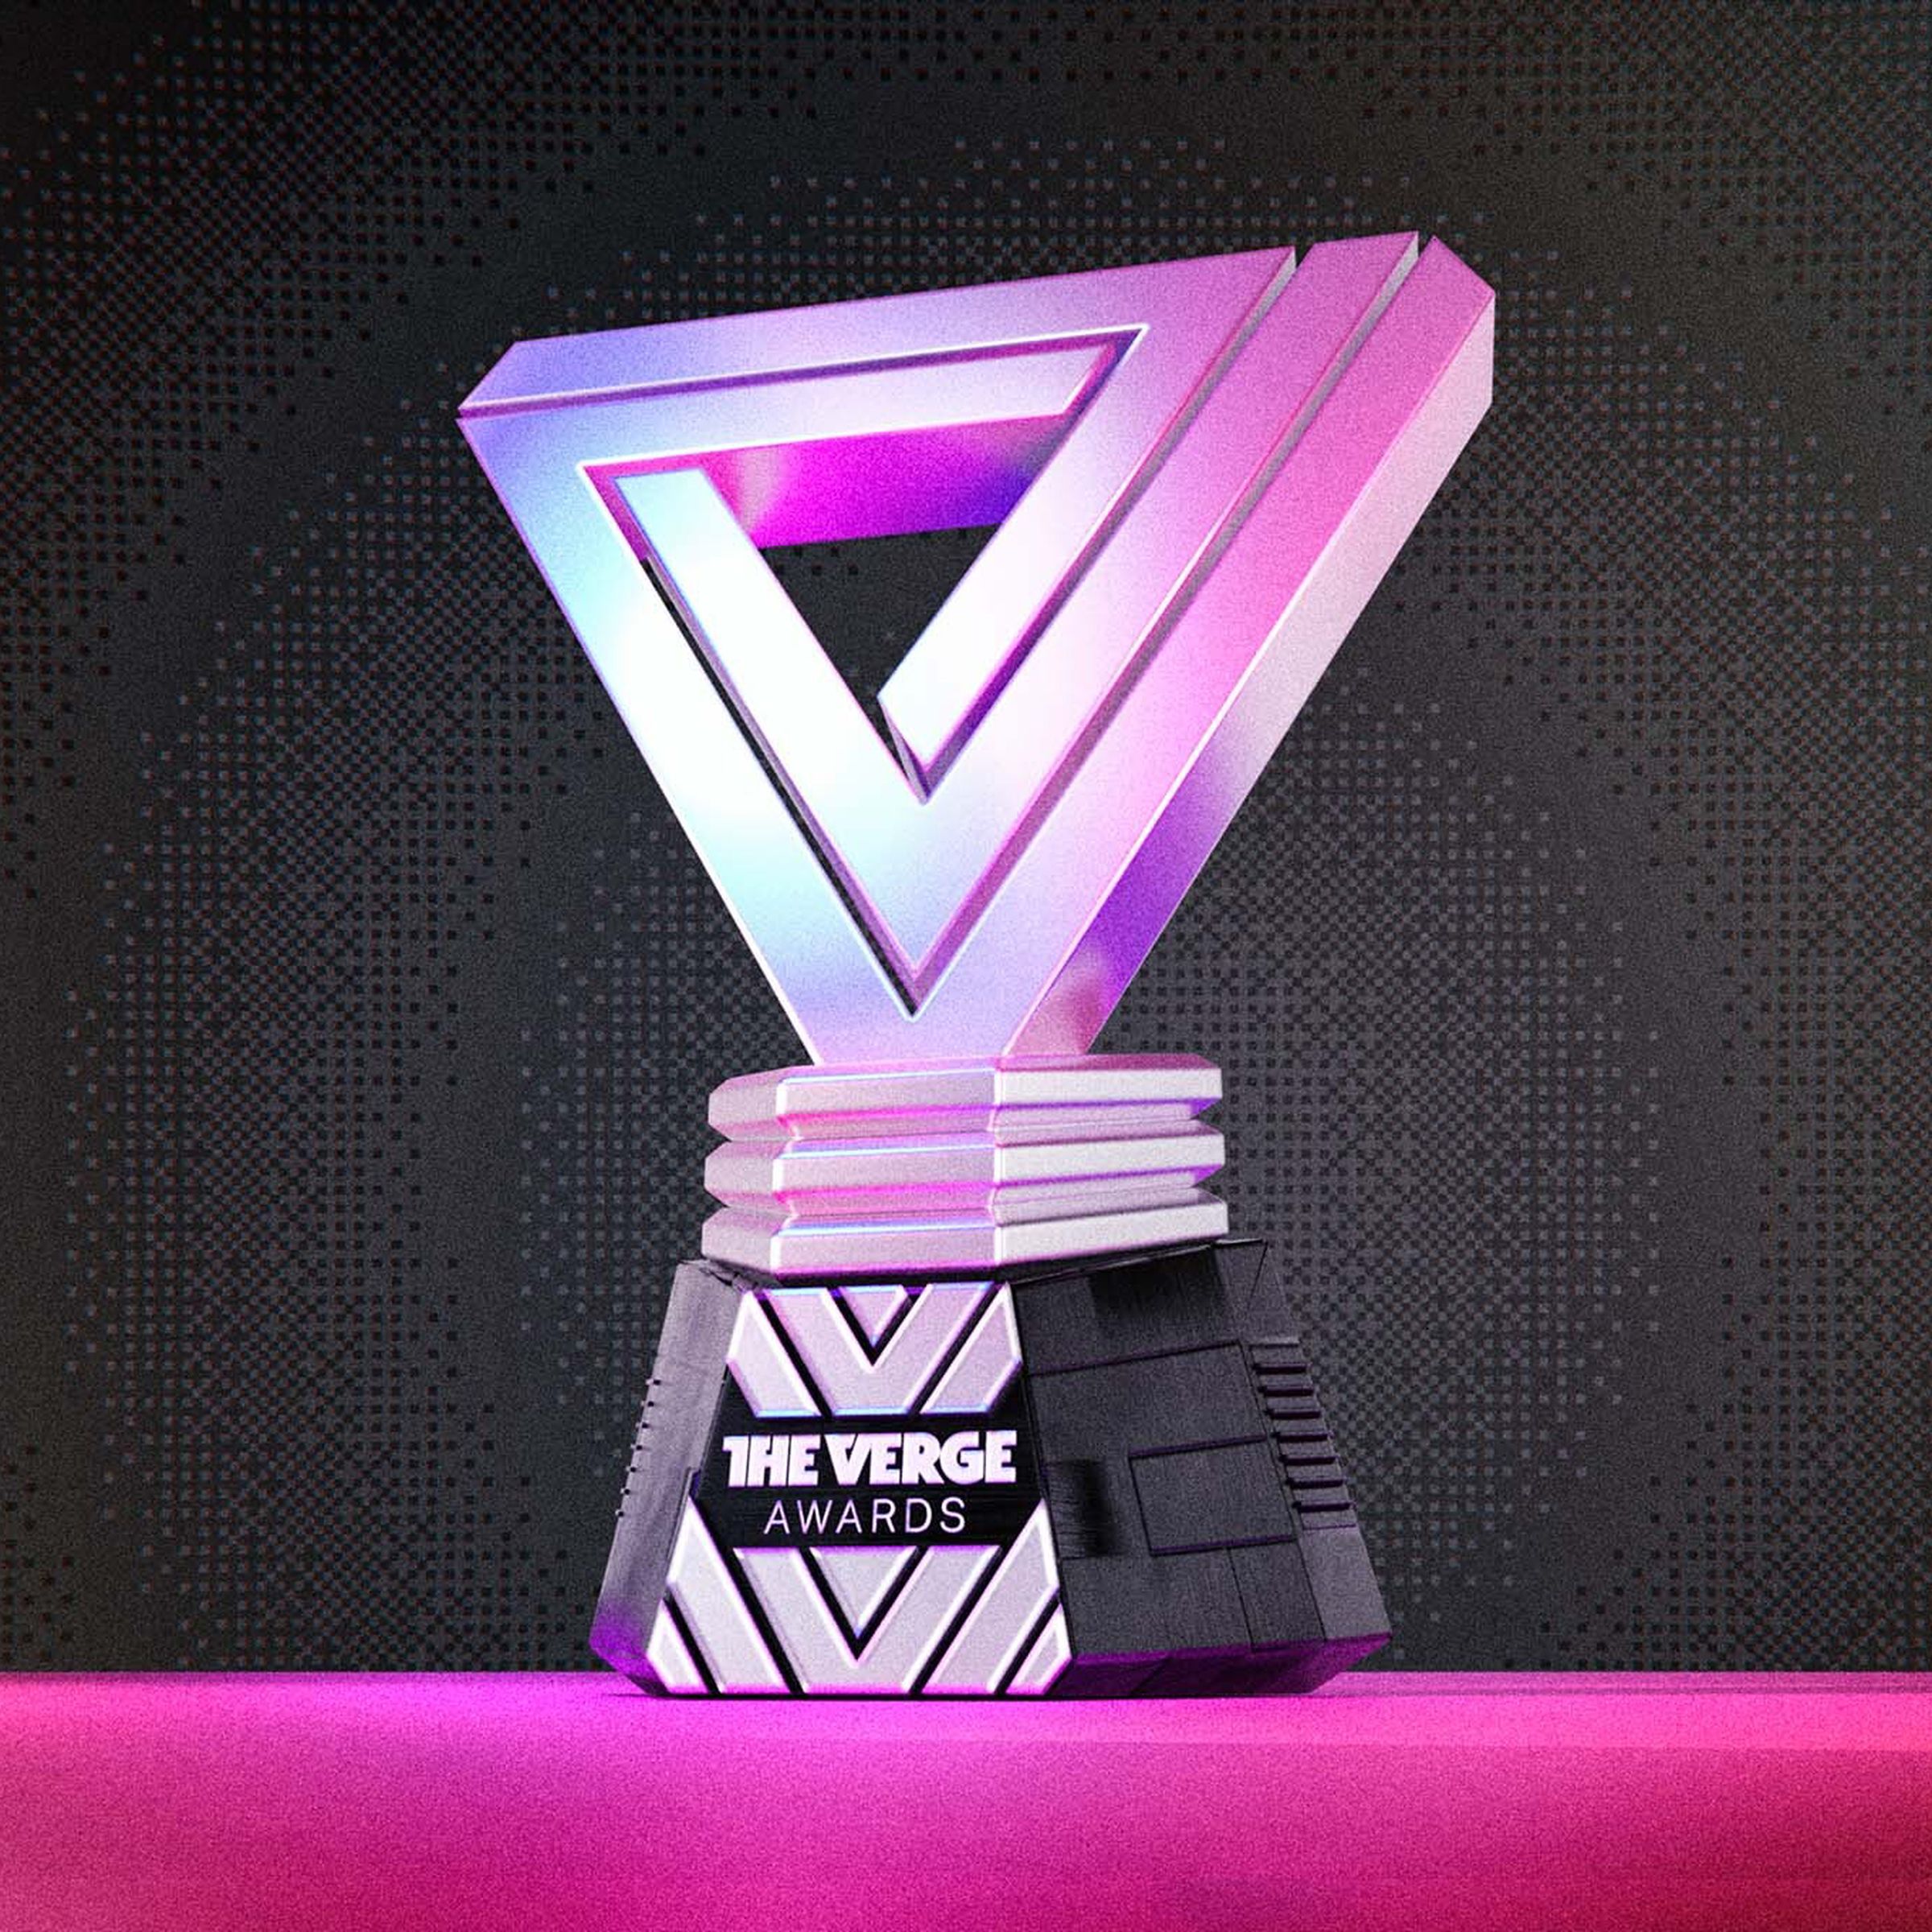 A virtual trophy for the Verge Awards at CES